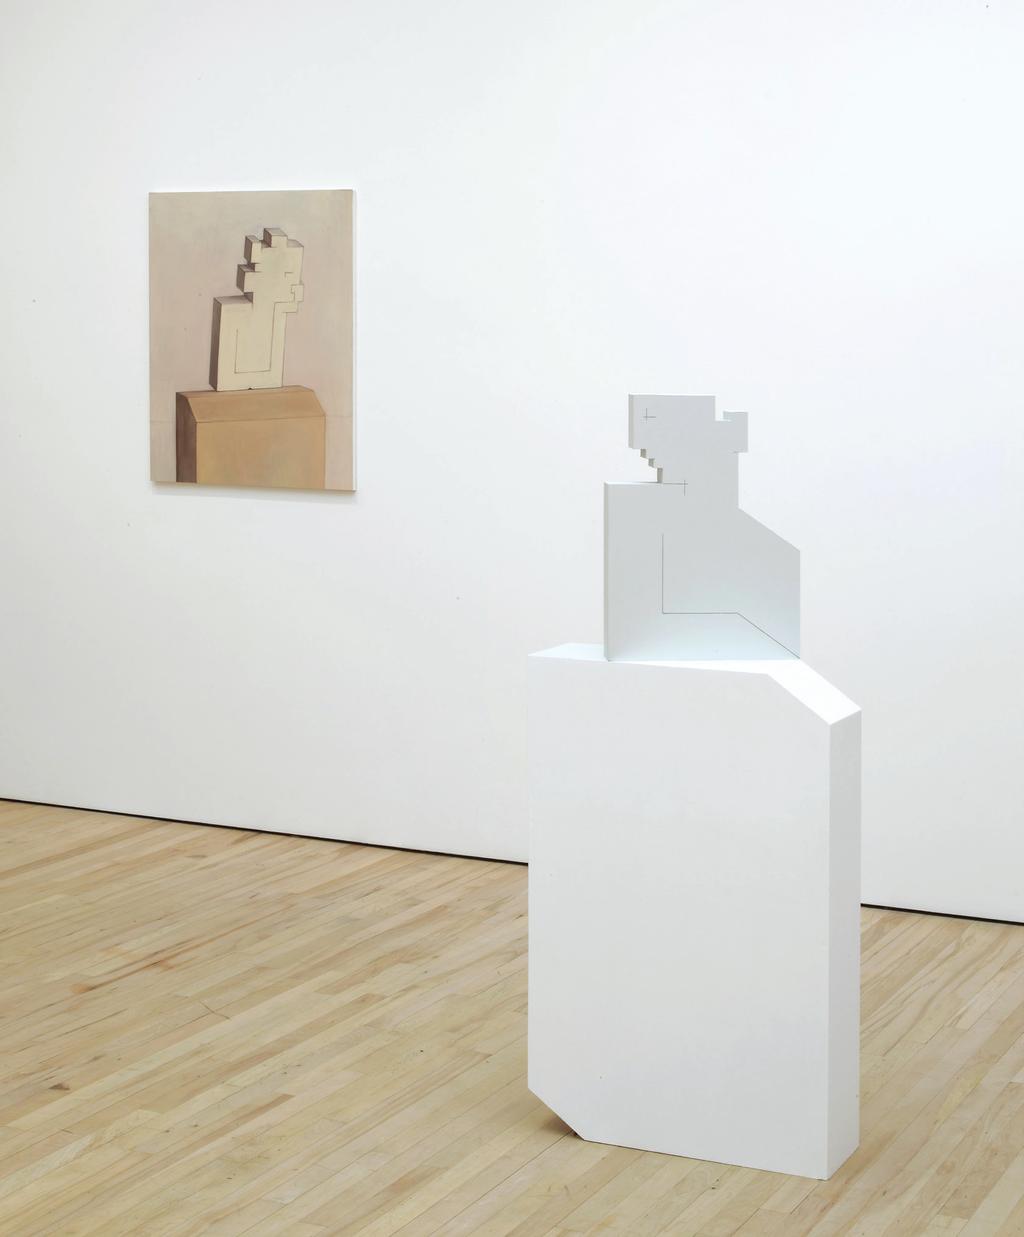 Astoria Installation view Carl Freedman Gallery, London, 2014 JS: Again it s that idea of it being a real object, or not being a real object, it being an illusion, or reality it pushes it into that